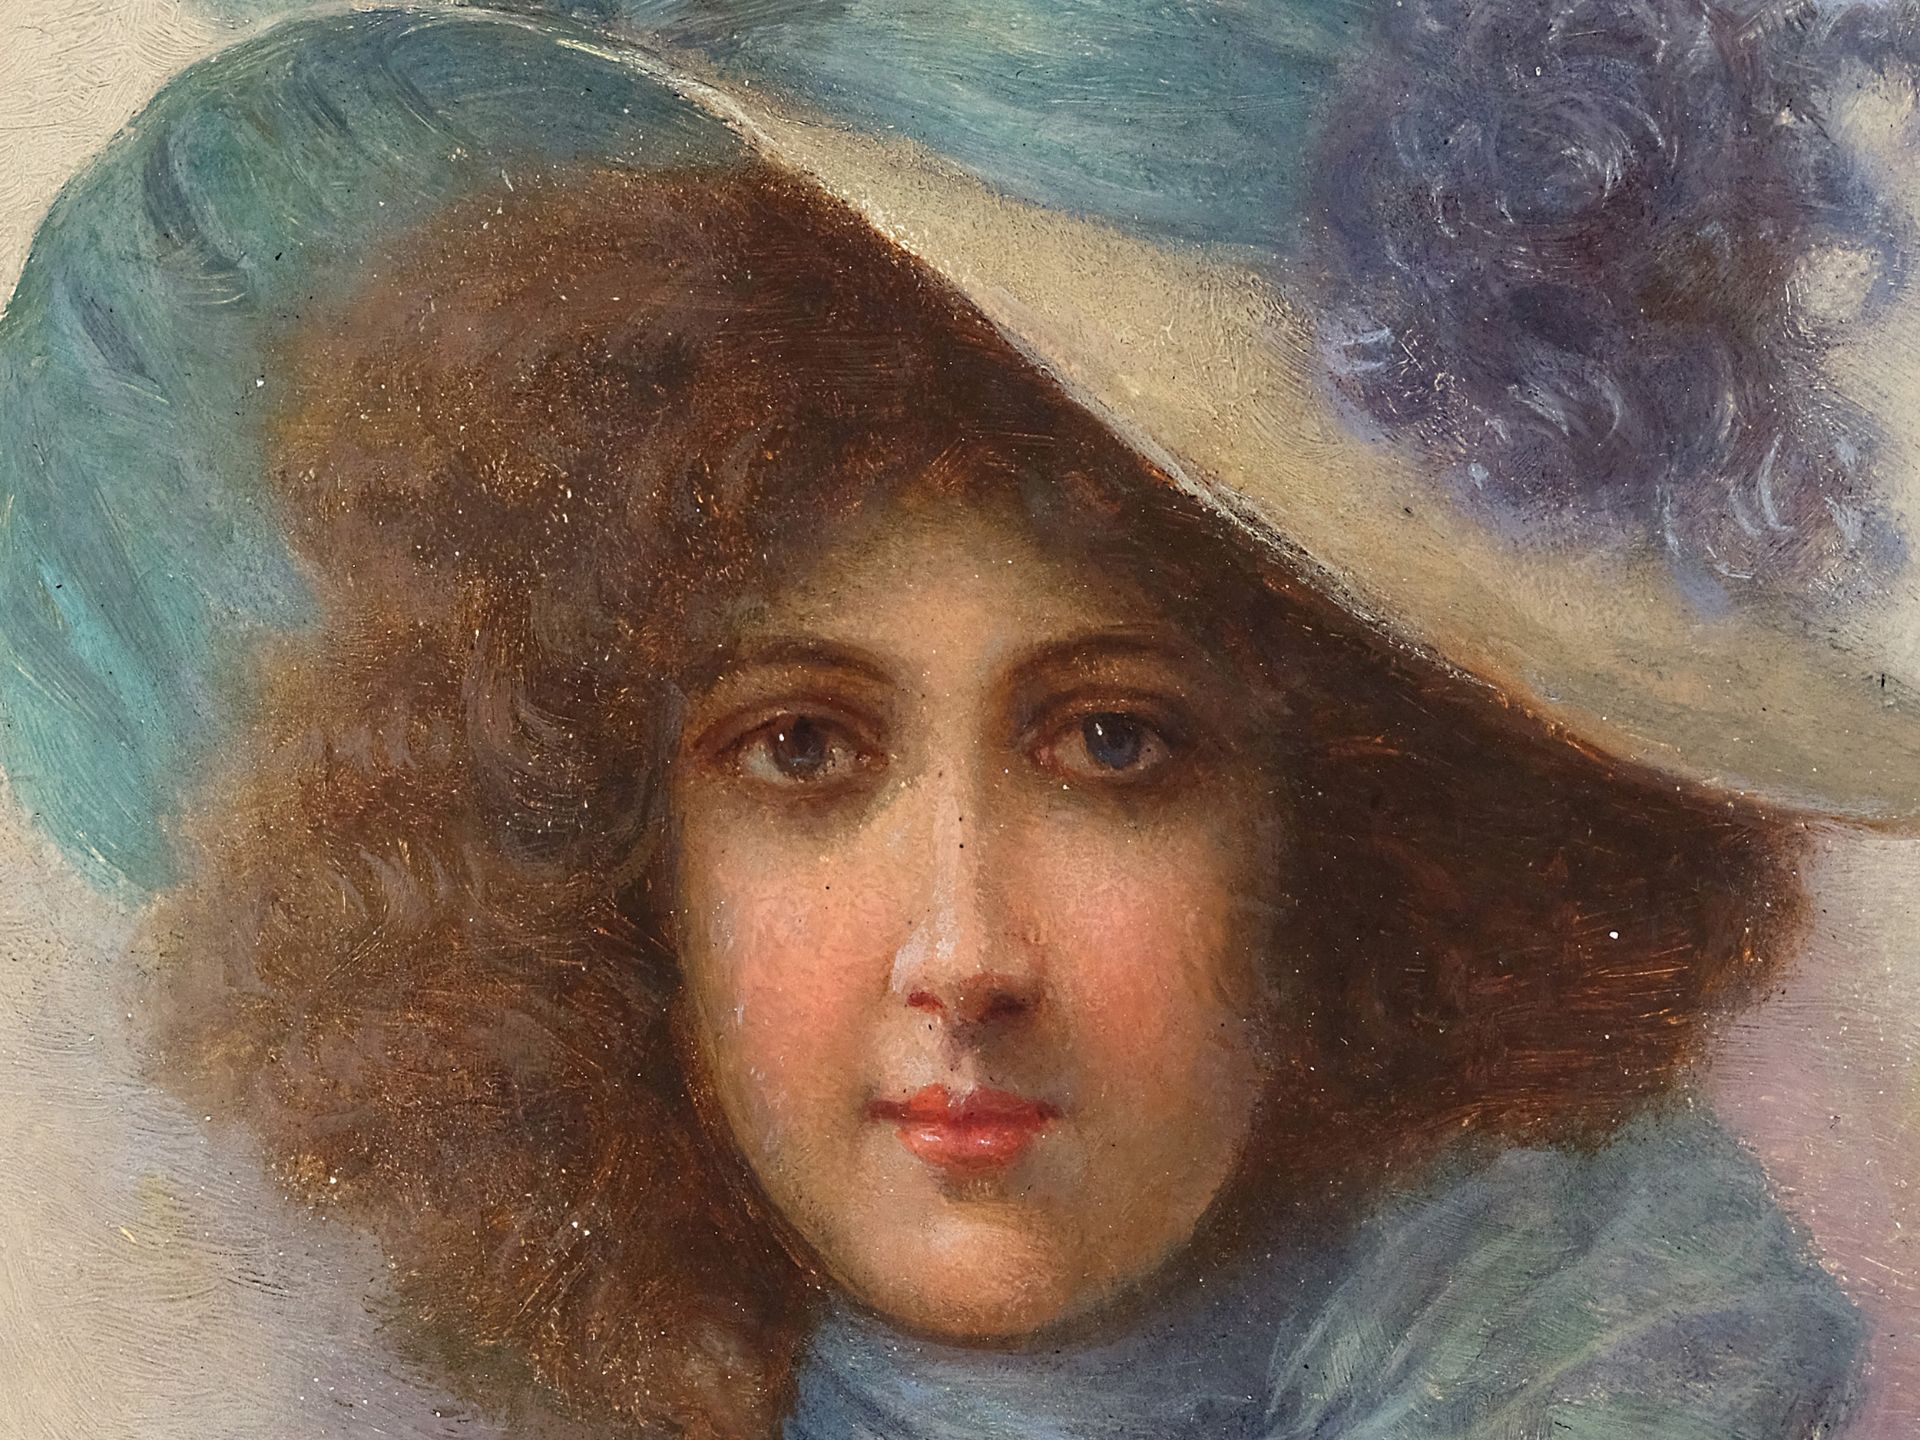 Unknown painter, around 1900, Portrait of a girl - Image 3 of 4